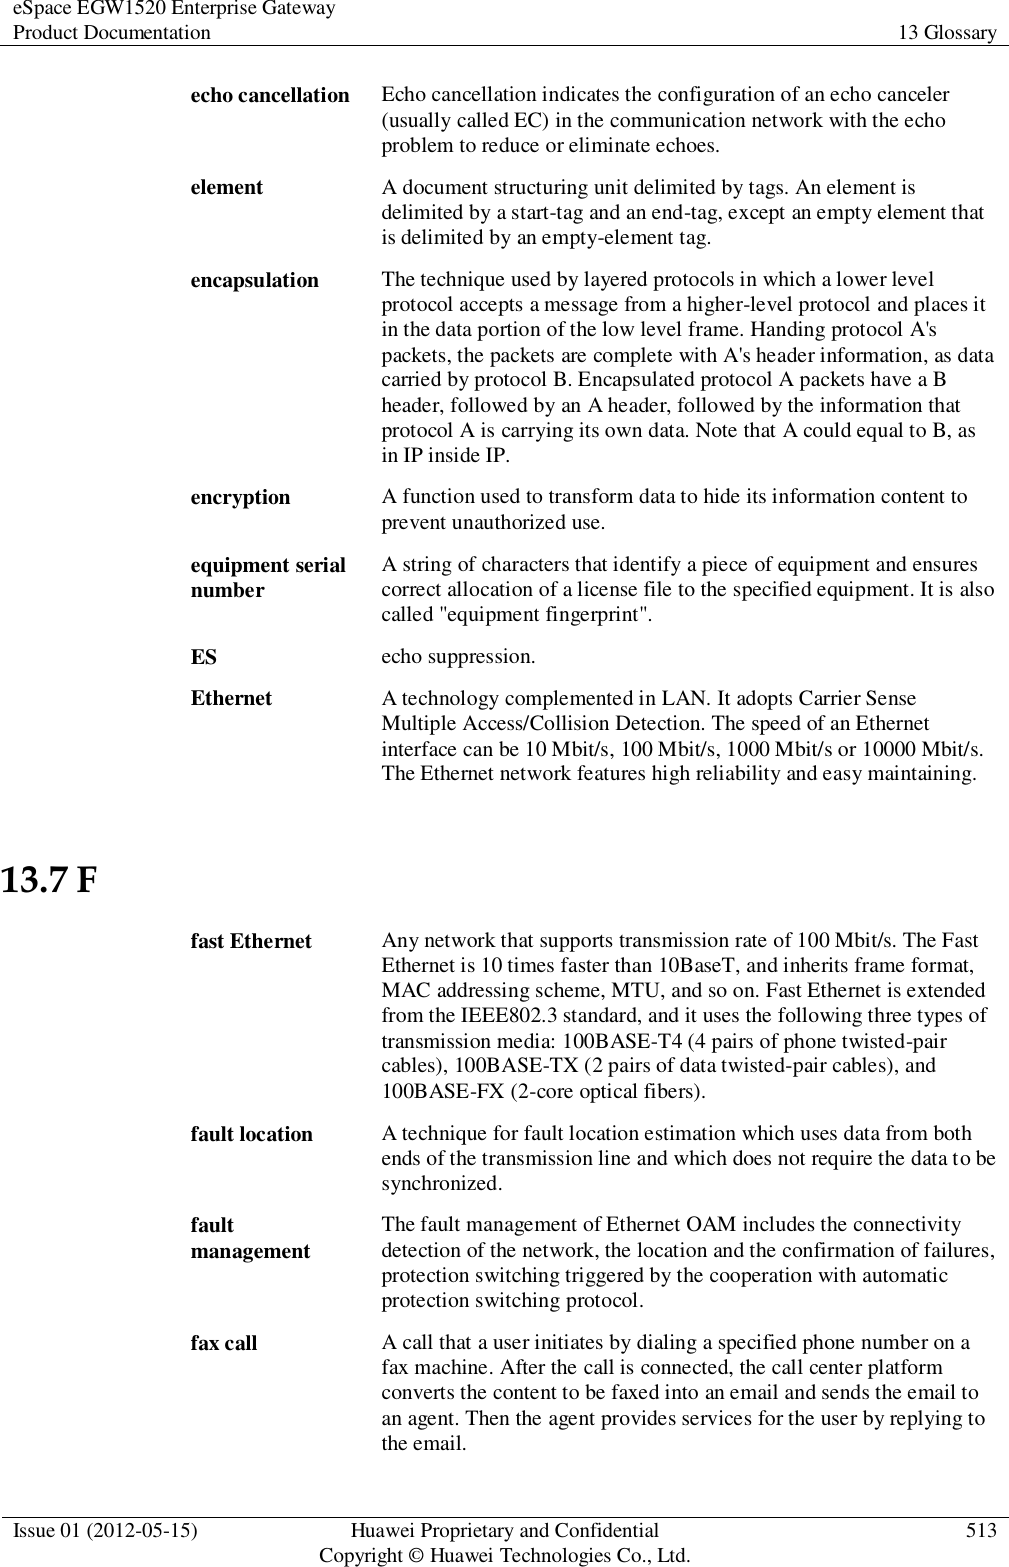 eSpace EGW1520 Enterprise Gateway Product Documentation 13 Glossary  Issue 01 (2012-05-15) Huawei Proprietary and Confidential                                     Copyright © Huawei Technologies Co., Ltd. 513  echo cancellation Echo cancellation indicates the configuration of an echo canceler (usually called EC) in the communication network with the echo problem to reduce or eliminate echoes. element A document structuring unit delimited by tags. An element is delimited by a start-tag and an end-tag, except an empty element that is delimited by an empty-element tag. encapsulation The technique used by layered protocols in which a lower level protocol accepts a message from a higher-level protocol and places it in the data portion of the low level frame. Handing protocol A&apos;s packets, the packets are complete with A&apos;s header information, as data carried by protocol B. Encapsulated protocol A packets have a B header, followed by an A header, followed by the information that protocol A is carrying its own data. Note that A could equal to B, as in IP inside IP. encryption A function used to transform data to hide its information content to prevent unauthorized use. equipment serial number A string of characters that identify a piece of equipment and ensures correct allocation of a license file to the specified equipment. It is also called &quot;equipment fingerprint&quot;. ES echo suppression. Ethernet A technology complemented in LAN. It adopts Carrier Sense Multiple Access/Collision Detection. The speed of an Ethernet interface can be 10 Mbit/s, 100 Mbit/s, 1000 Mbit/s or 10000 Mbit/s. The Ethernet network features high reliability and easy maintaining. 13.7 F fast Ethernet Any network that supports transmission rate of 100 Mbit/s. The Fast Ethernet is 10 times faster than 10BaseT, and inherits frame format, MAC addressing scheme, MTU, and so on. Fast Ethernet is extended from the IEEE802.3 standard, and it uses the following three types of transmission media: 100BASE-T4 (4 pairs of phone twisted-pair cables), 100BASE-TX (2 pairs of data twisted-pair cables), and 100BASE-FX (2-core optical fibers). fault location A technique for fault location estimation which uses data from both ends of the transmission line and which does not require the data to be synchronized. fault management The fault management of Ethernet OAM includes the connectivity detection of the network, the location and the confirmation of failures, protection switching triggered by the cooperation with automatic protection switching protocol. fax call A call that a user initiates by dialing a specified phone number on a fax machine. After the call is connected, the call center platform converts the content to be faxed into an email and sends the email to an agent. Then the agent provides services for the user by replying to the email. 